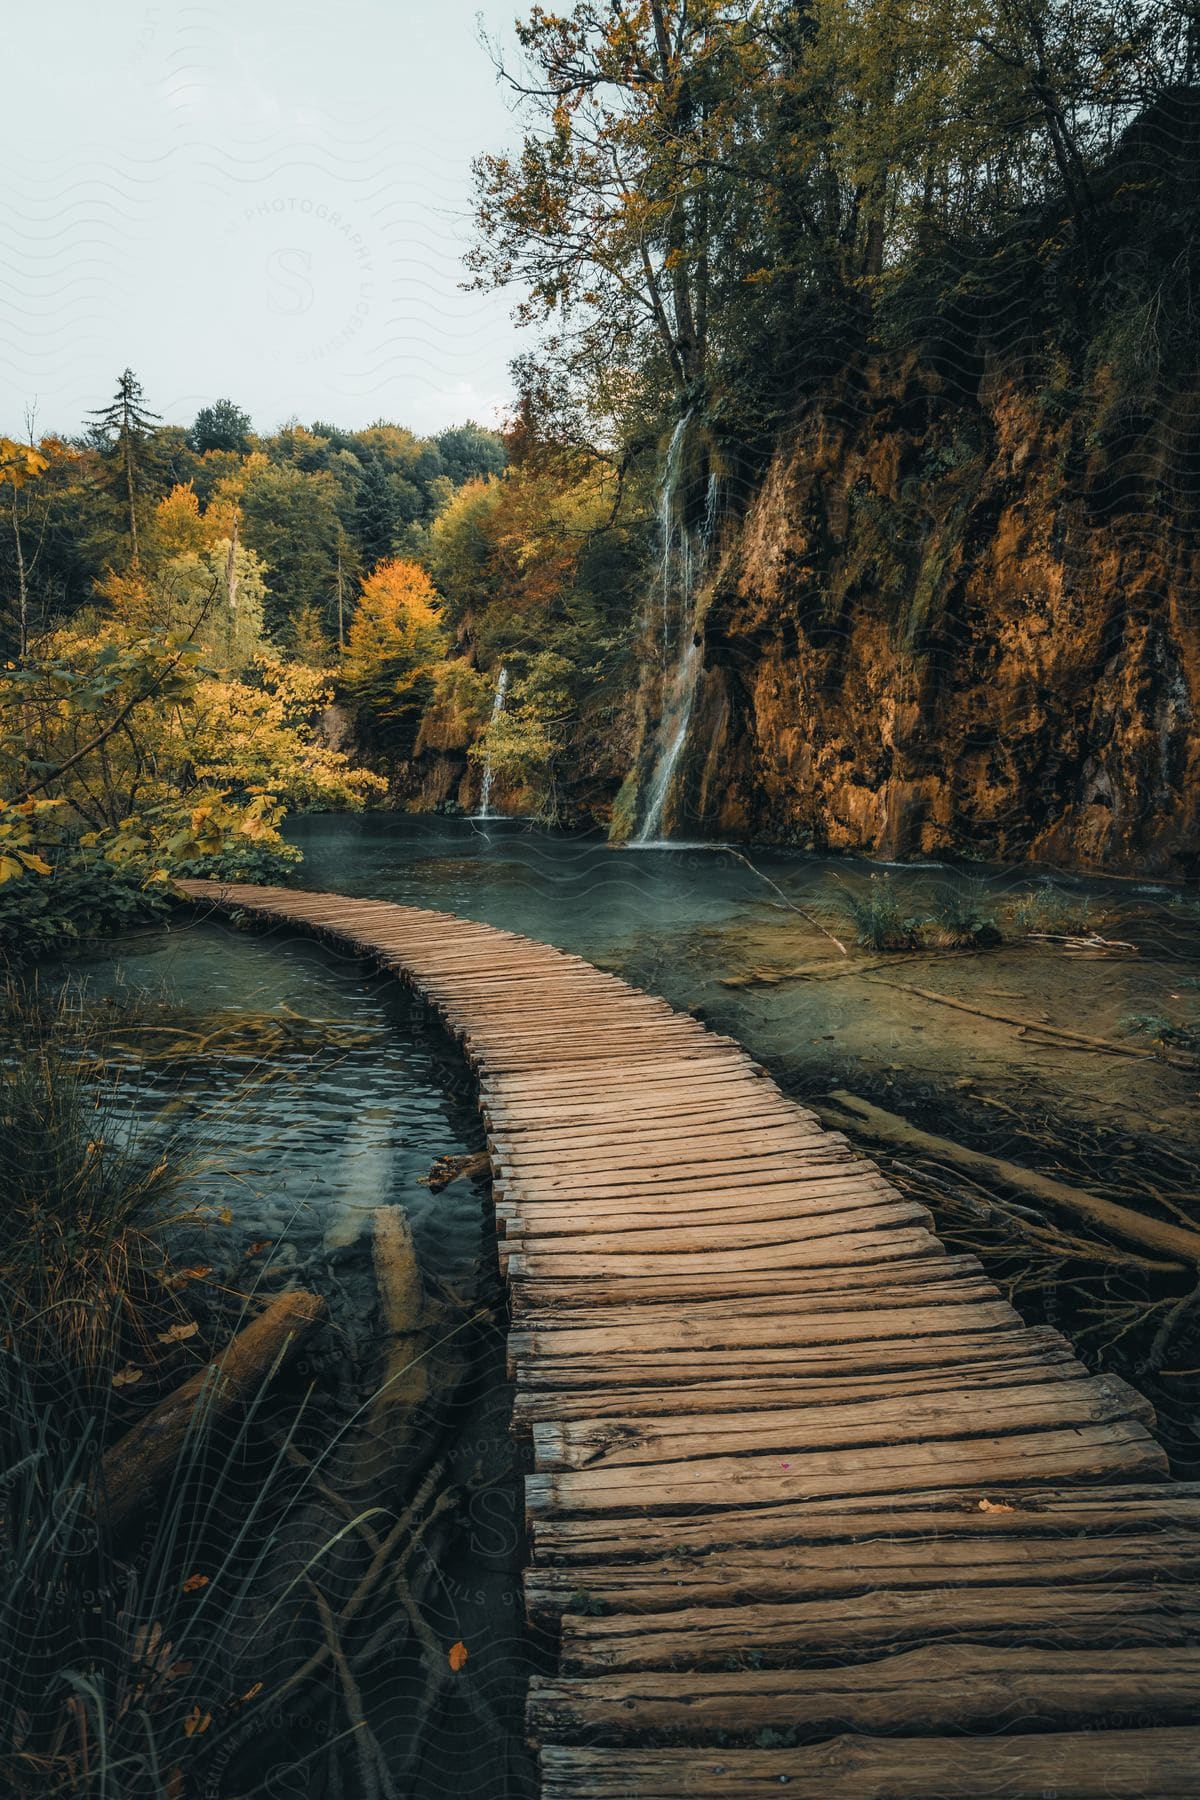 Stock photo of a wooden path over a river near mountains and trees